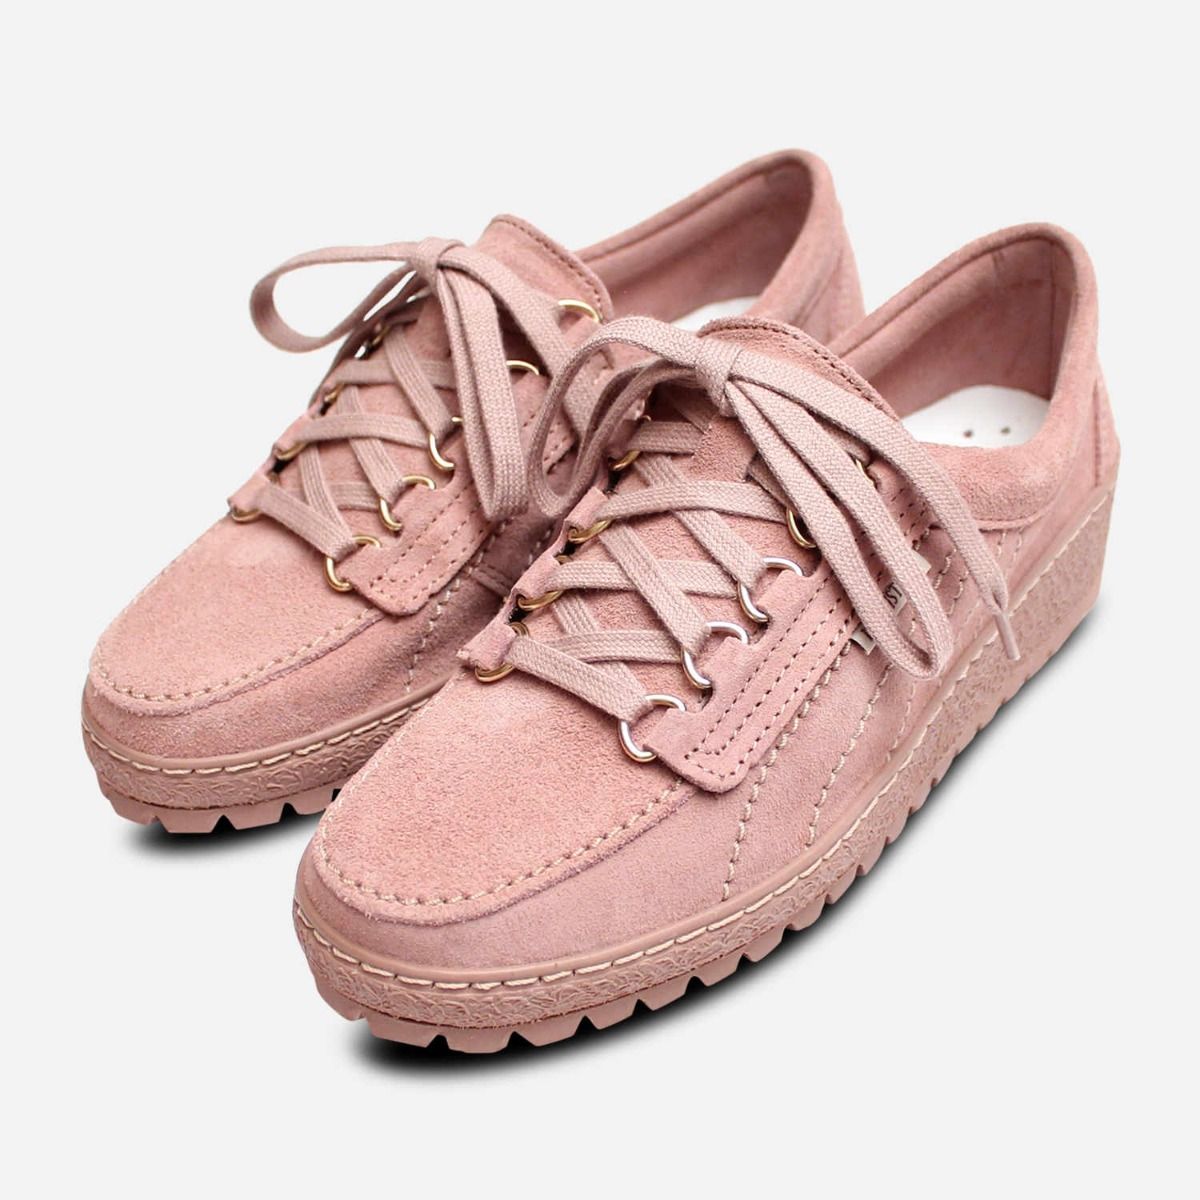 Mephisto Lady Shoes in Pastel Pink 